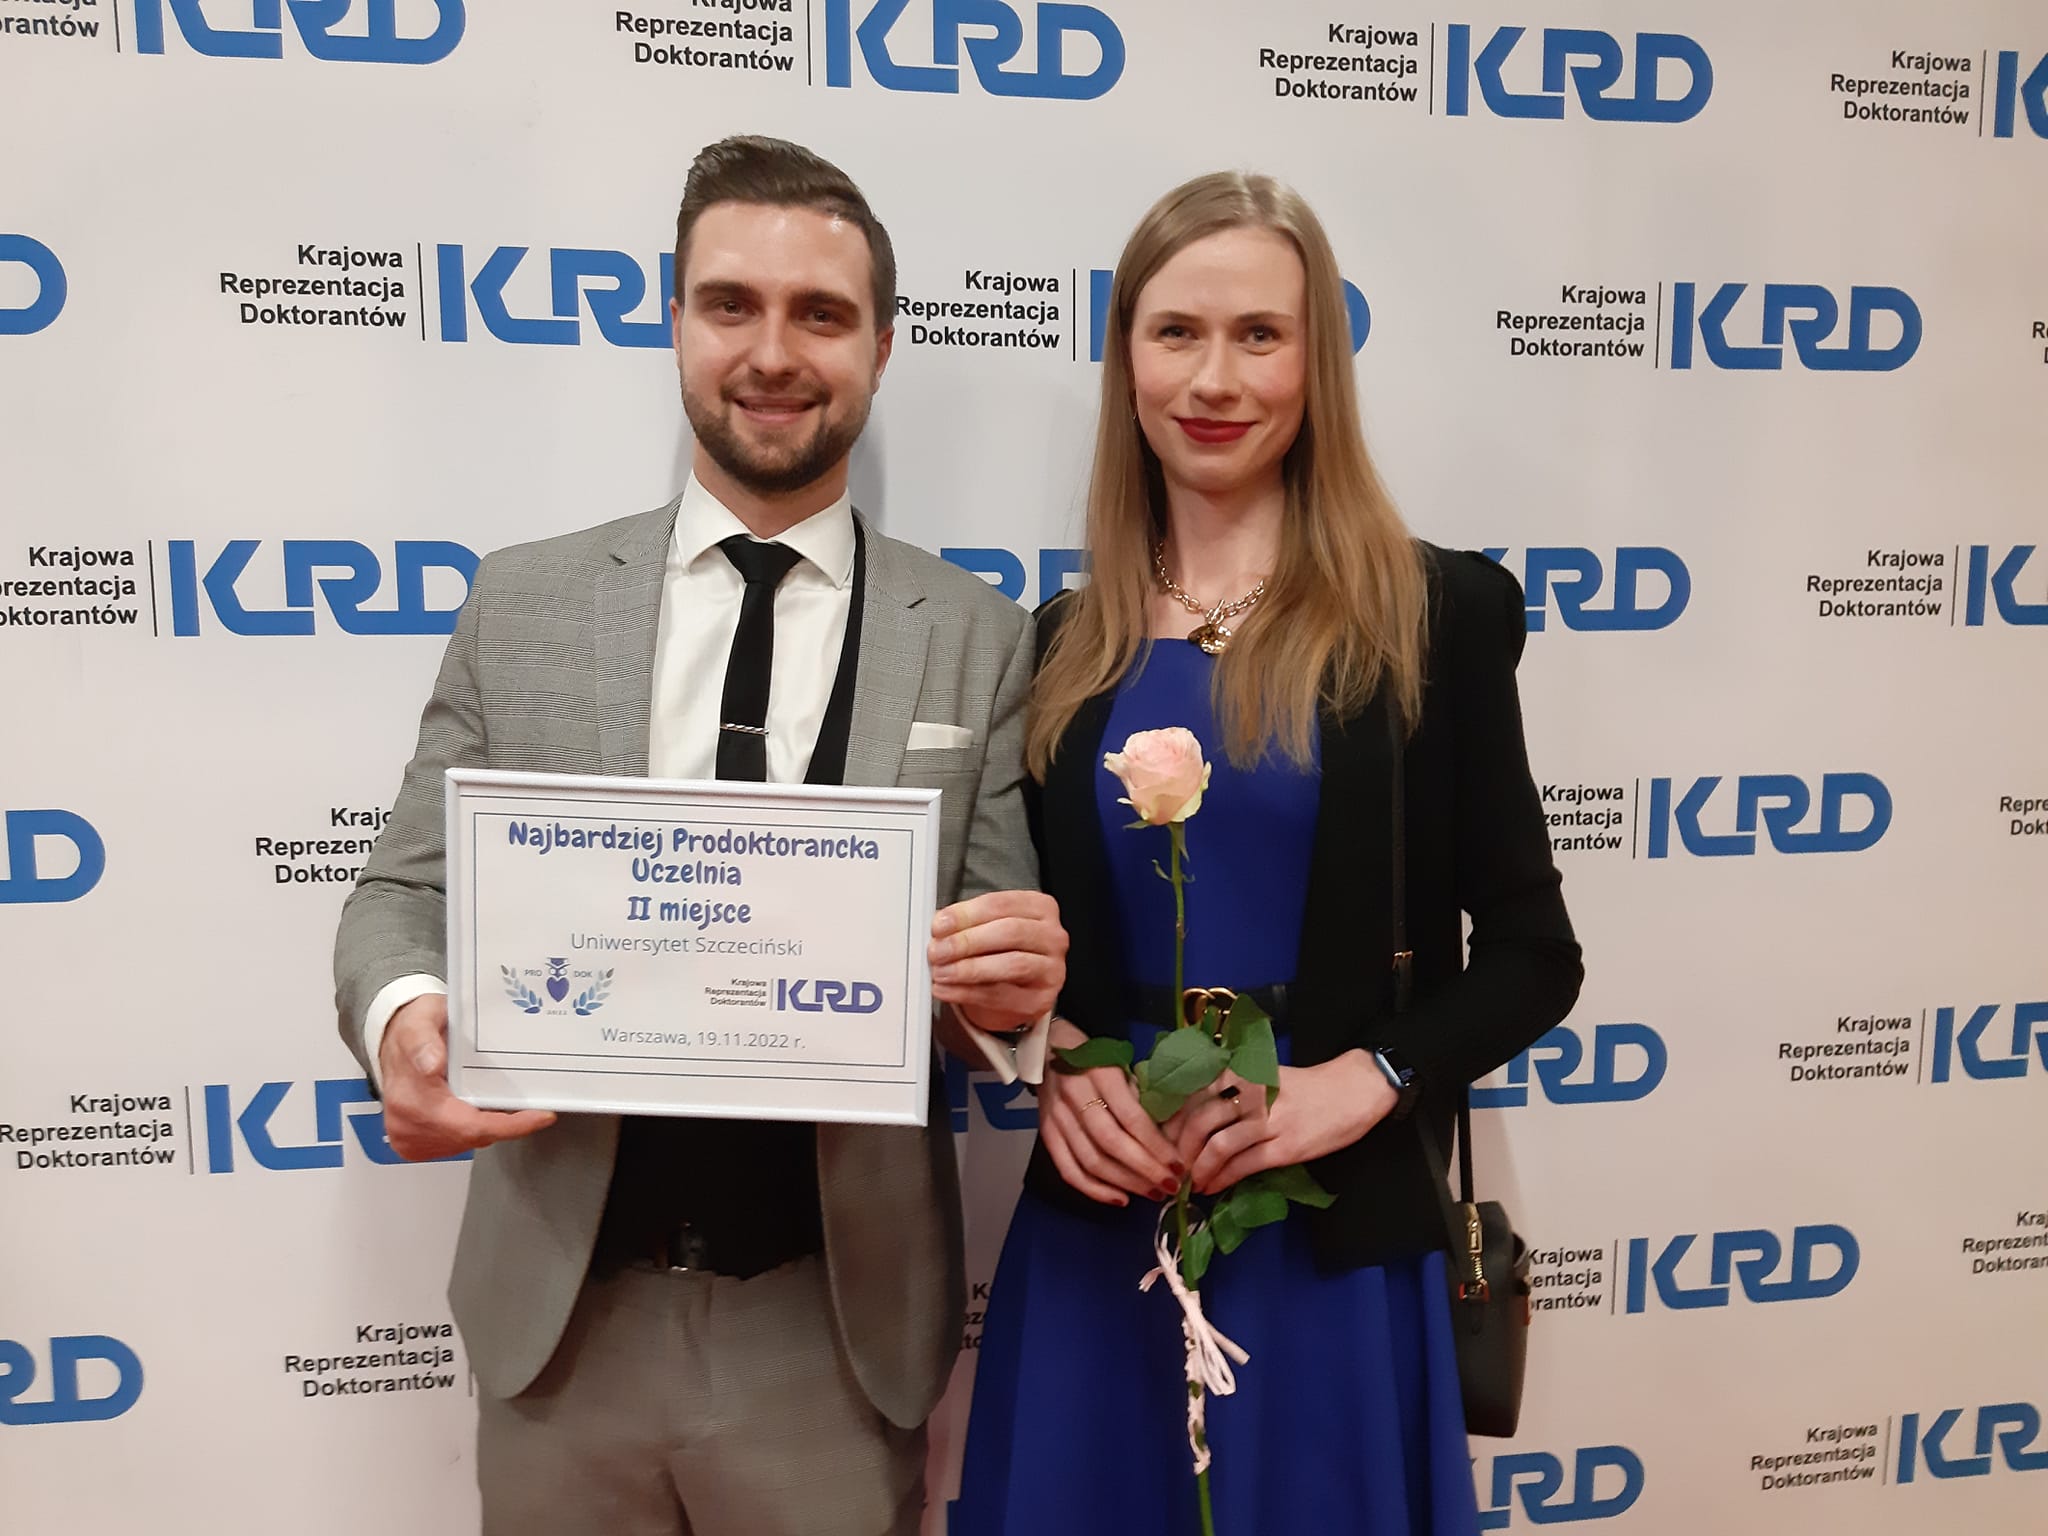 The University of Szczecin took second place in the category “Most Pro-Doctoral University in Poland”.